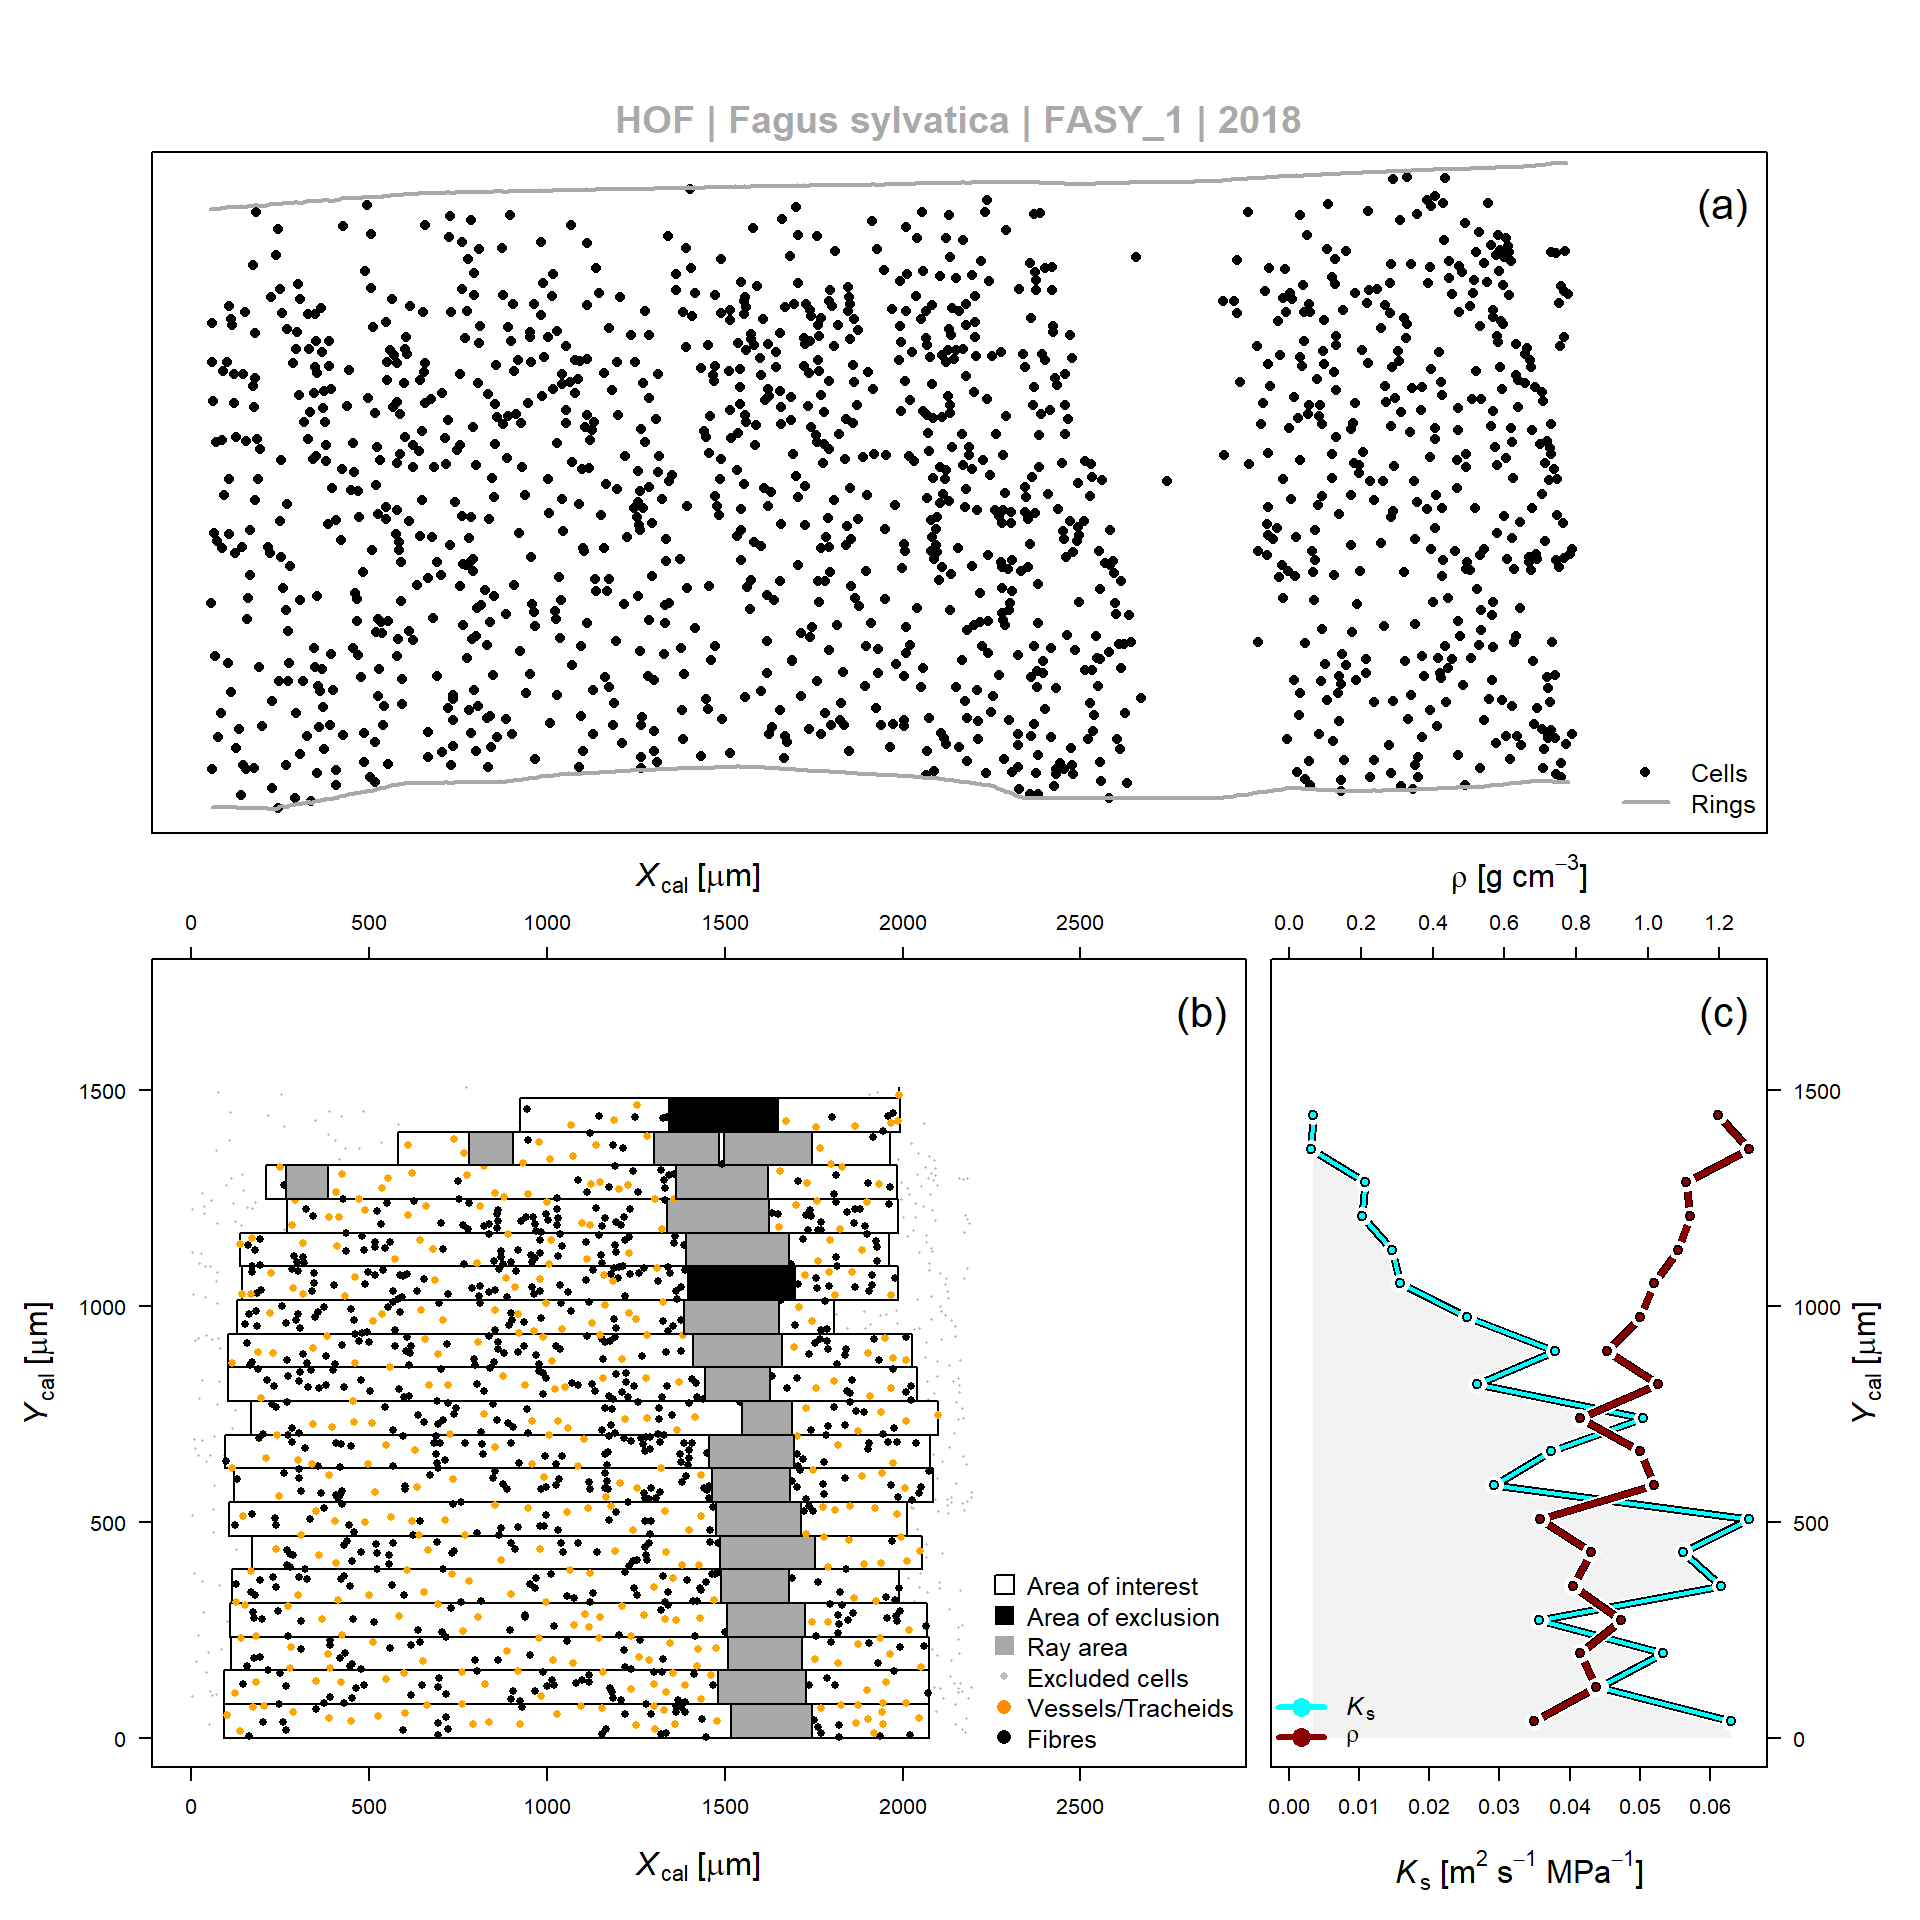 Example of wood anatomical data processing according to SECTOR, for the 2010 tree ring obtained from a Fagus sylvatica tree (FASY_1). (a) Relative center position of vessels and fibers detected by the image analyses software (output from ROXAS). (b) Application of a sectorial binning approach relative to the ring boundary according to the relative position (Ycal and Xcal). Detection algorithms are included which detect rays and areas of exclusion within the bin area (or area of interest). (c) Average theoretical hydraulic conductivity (Ks) and wood density (??) per bin, as defined in (b).